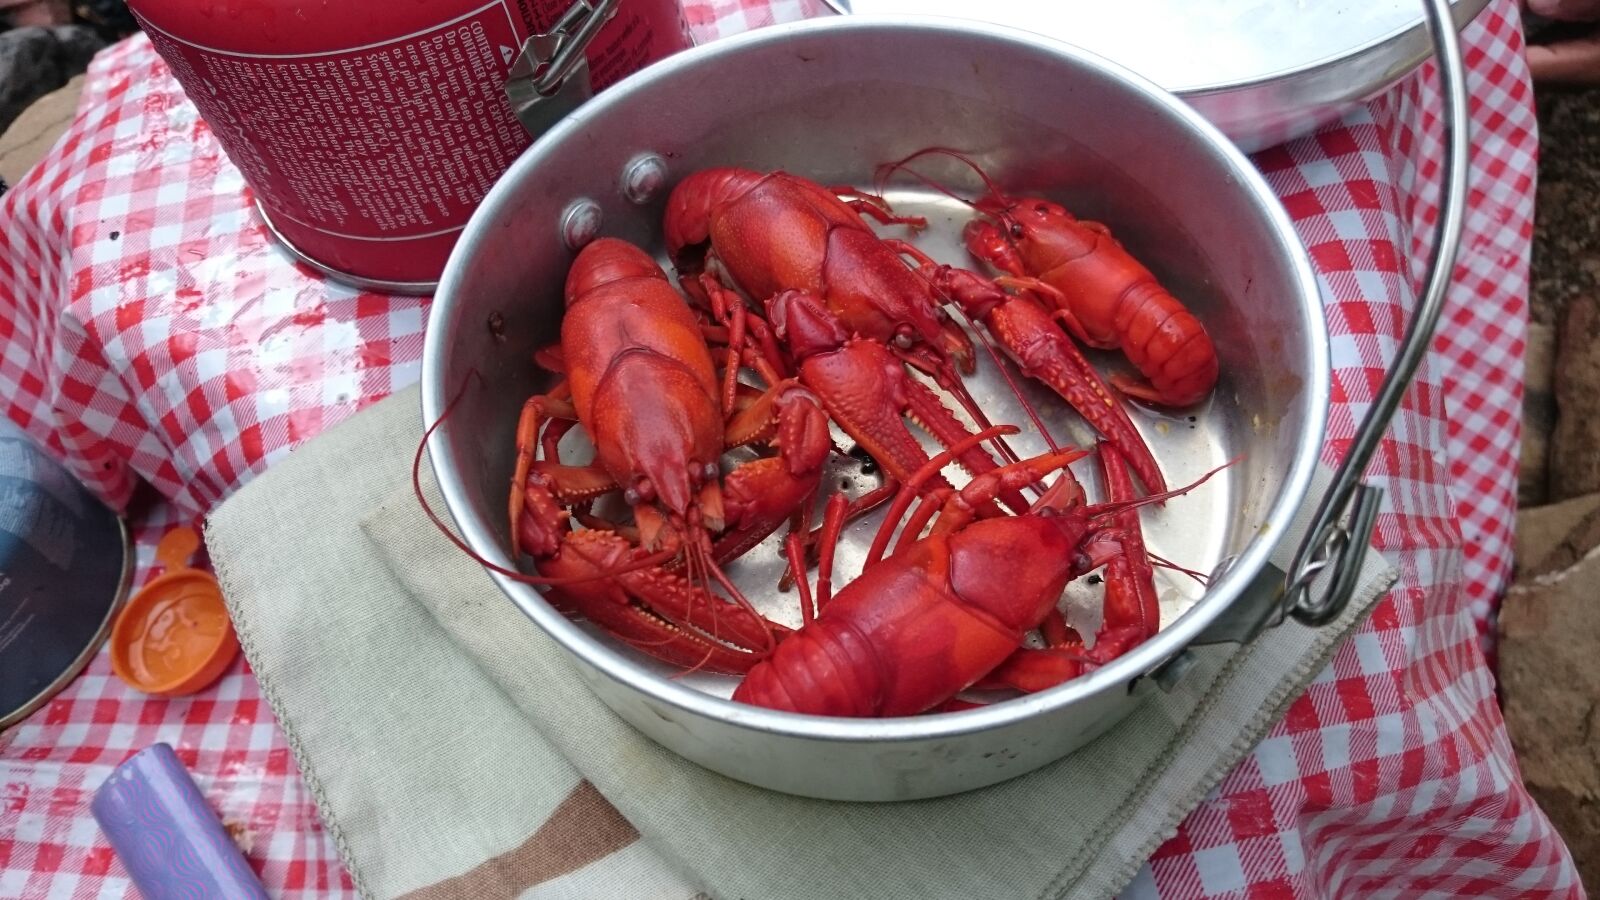 Sony Xperia Z3 Compact sample photo. Crayfish photography